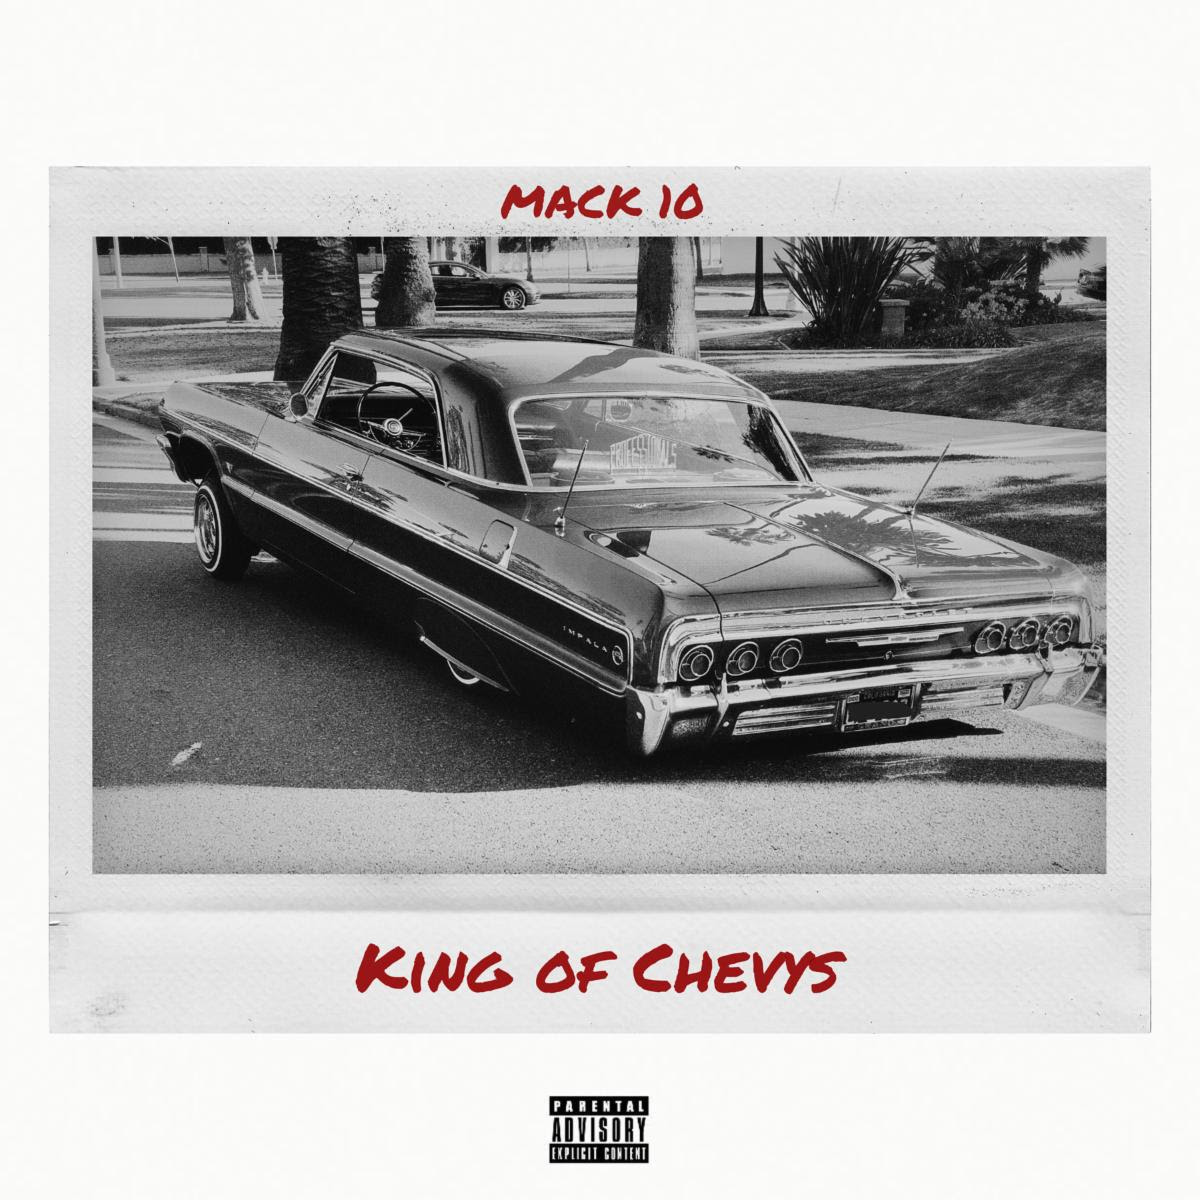 King of Chevys by Mack 10 - Artwork